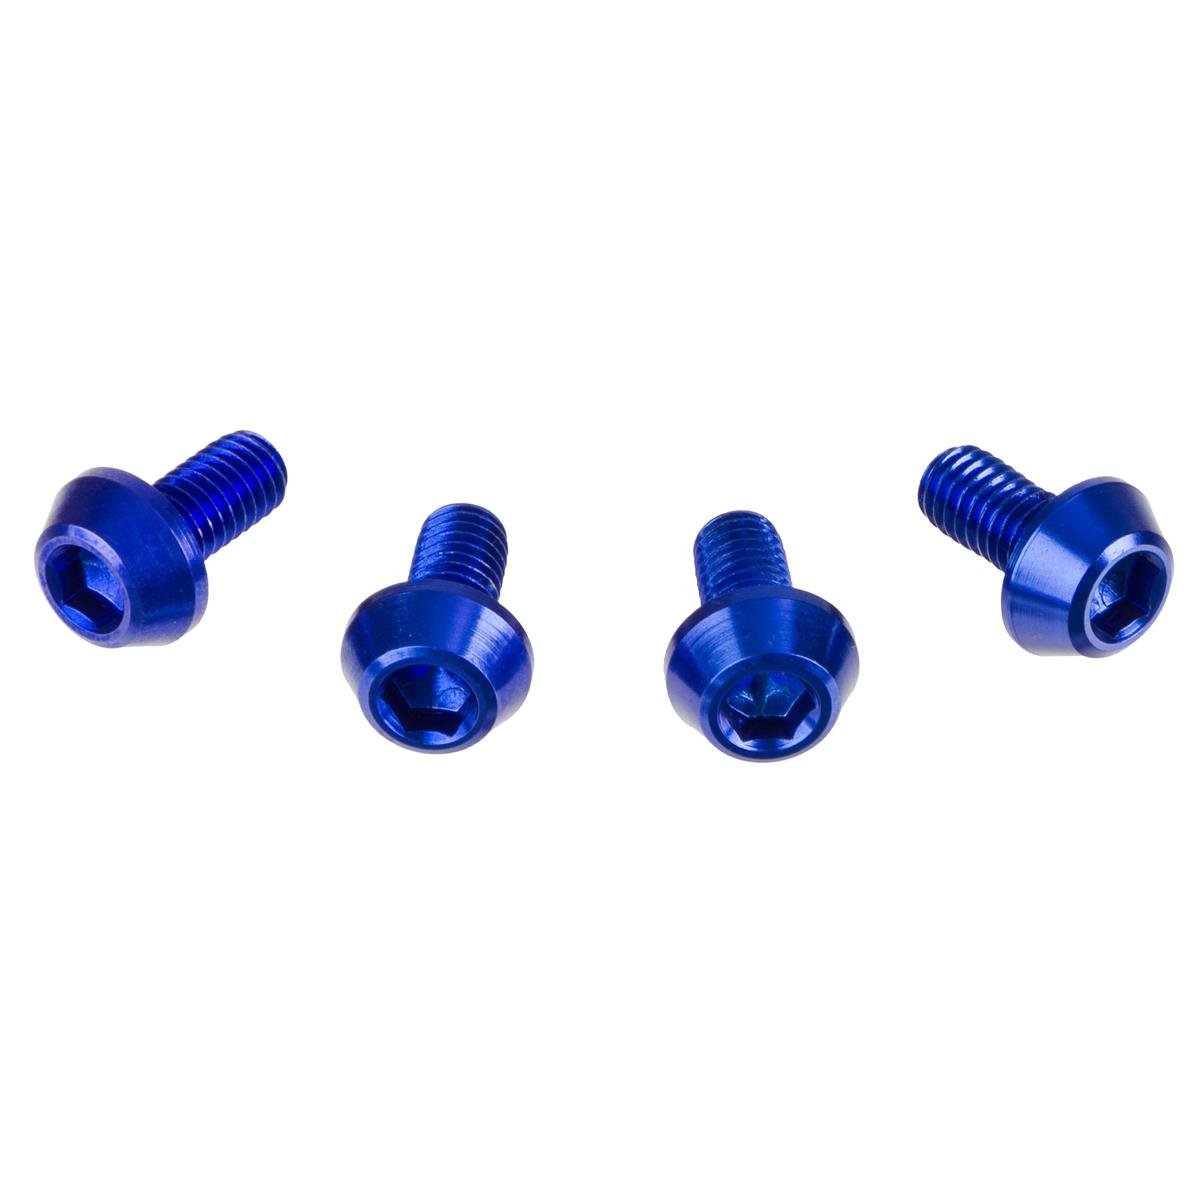 DRC Inner Hex Bolts  M6 x 12 mm, Blue, Pack of 4